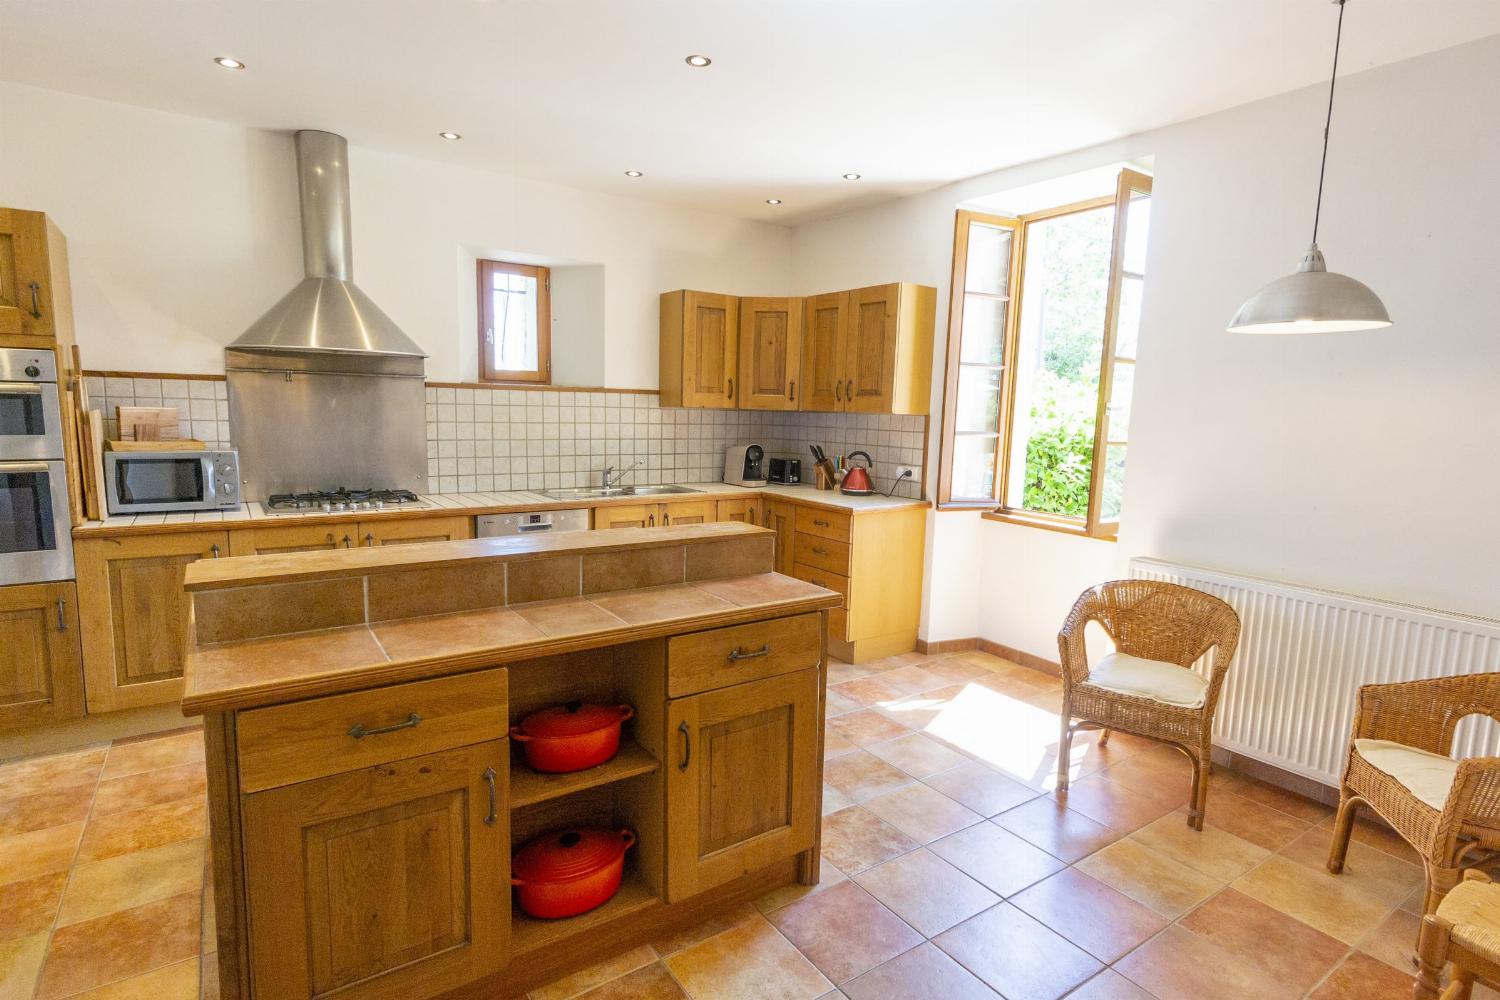 Kitchen | Holiday home in Monflanquin